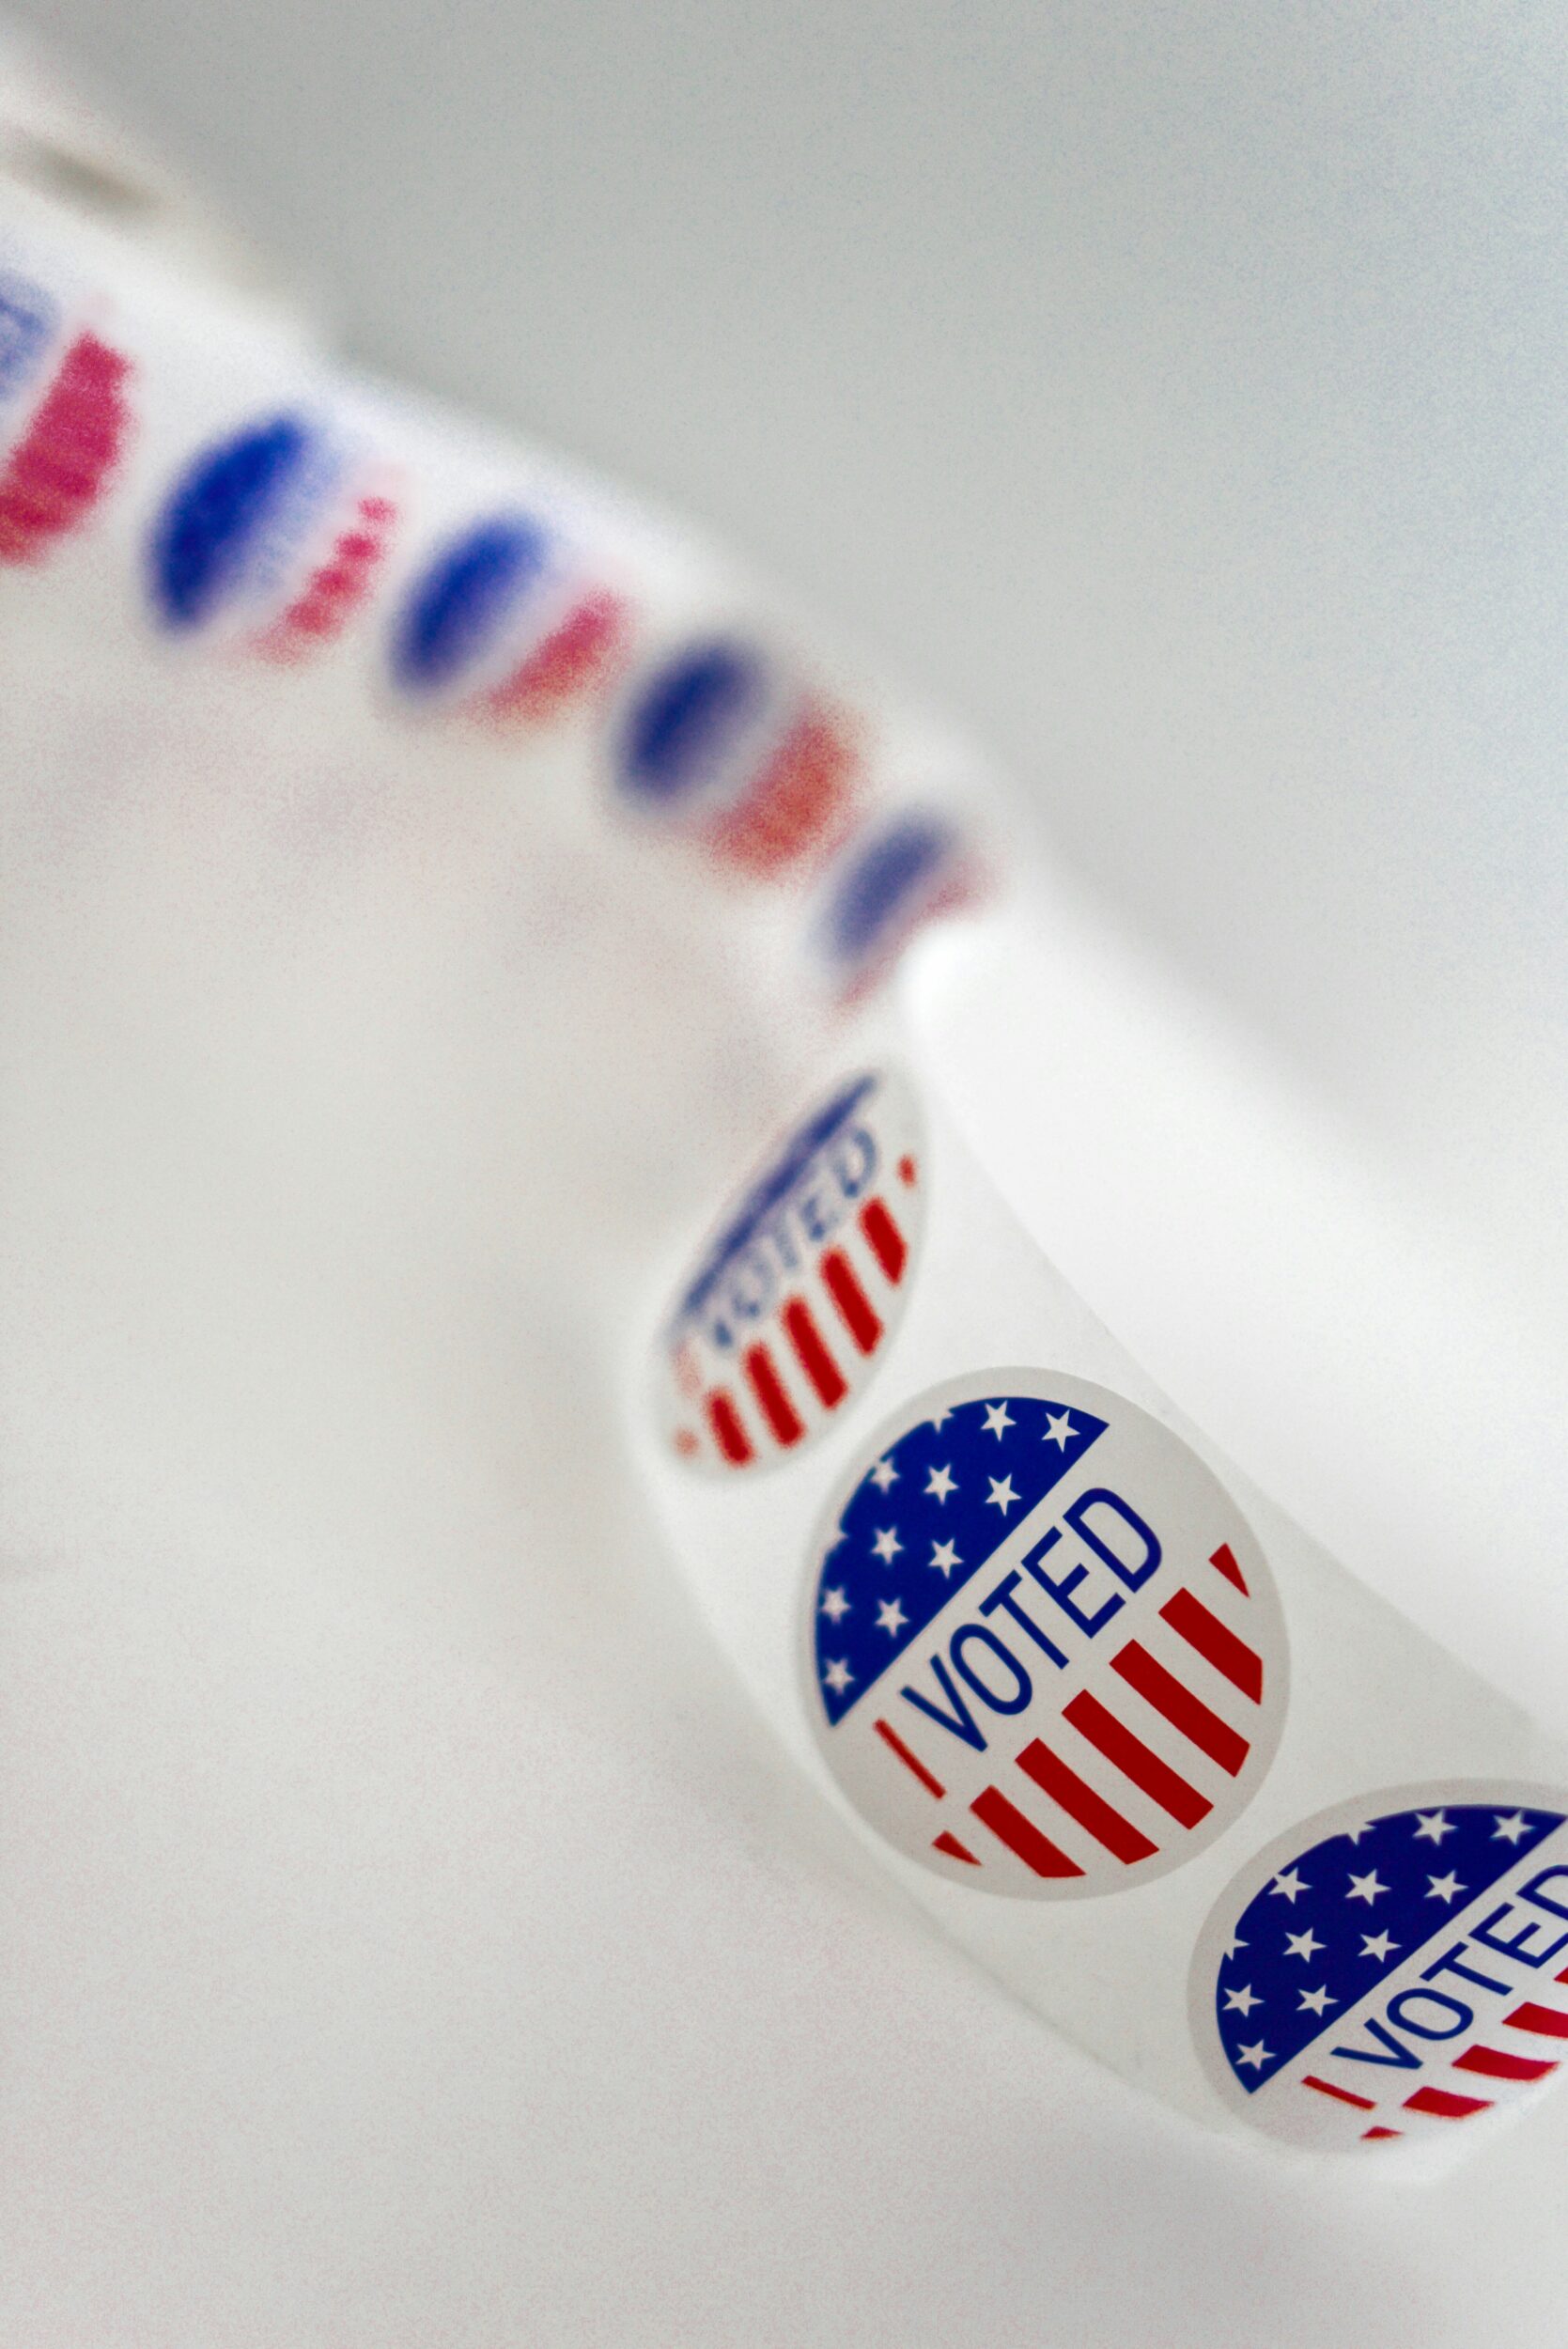 roll of I voted stickers that are given out when you vote at a polling place in the United States